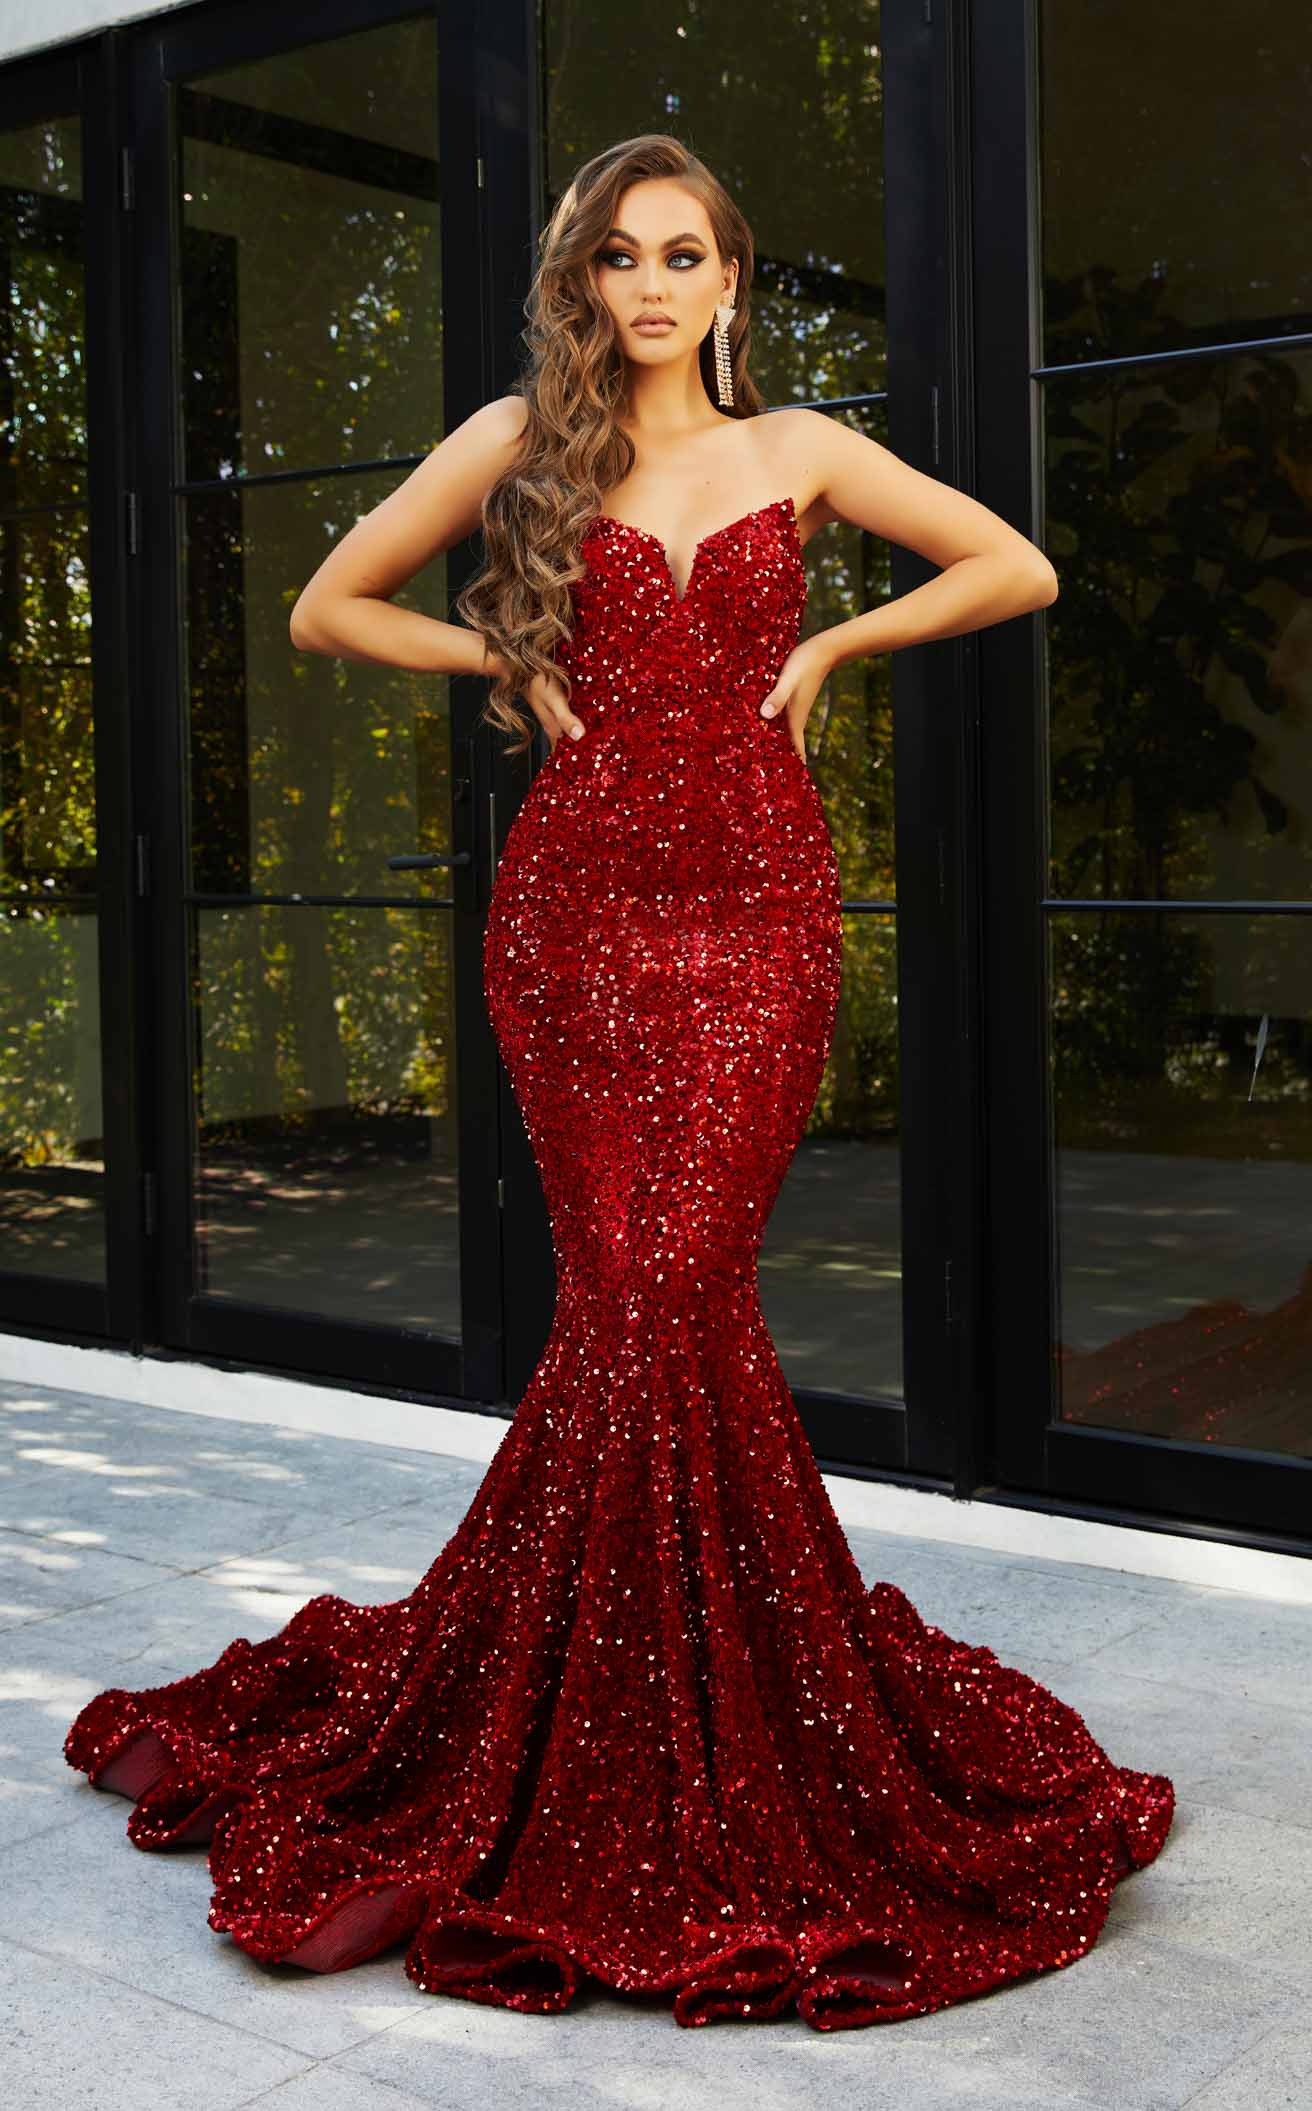 Find Red Prom Dresses at the Best Price! - The Dress Outlet